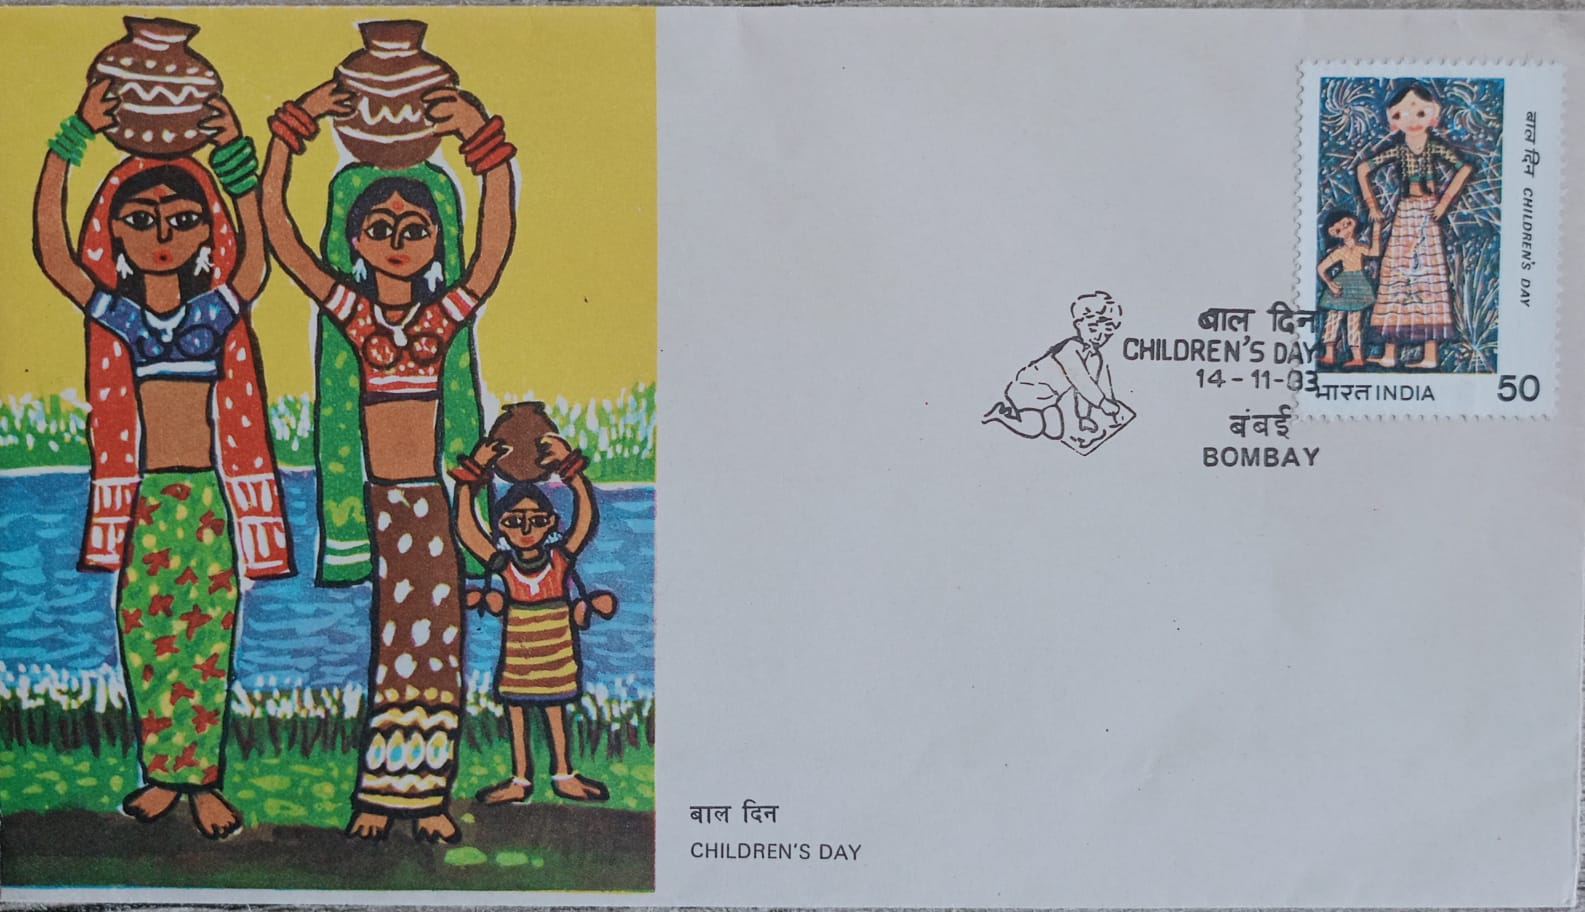 India 1983 Children's Day First Day Cover